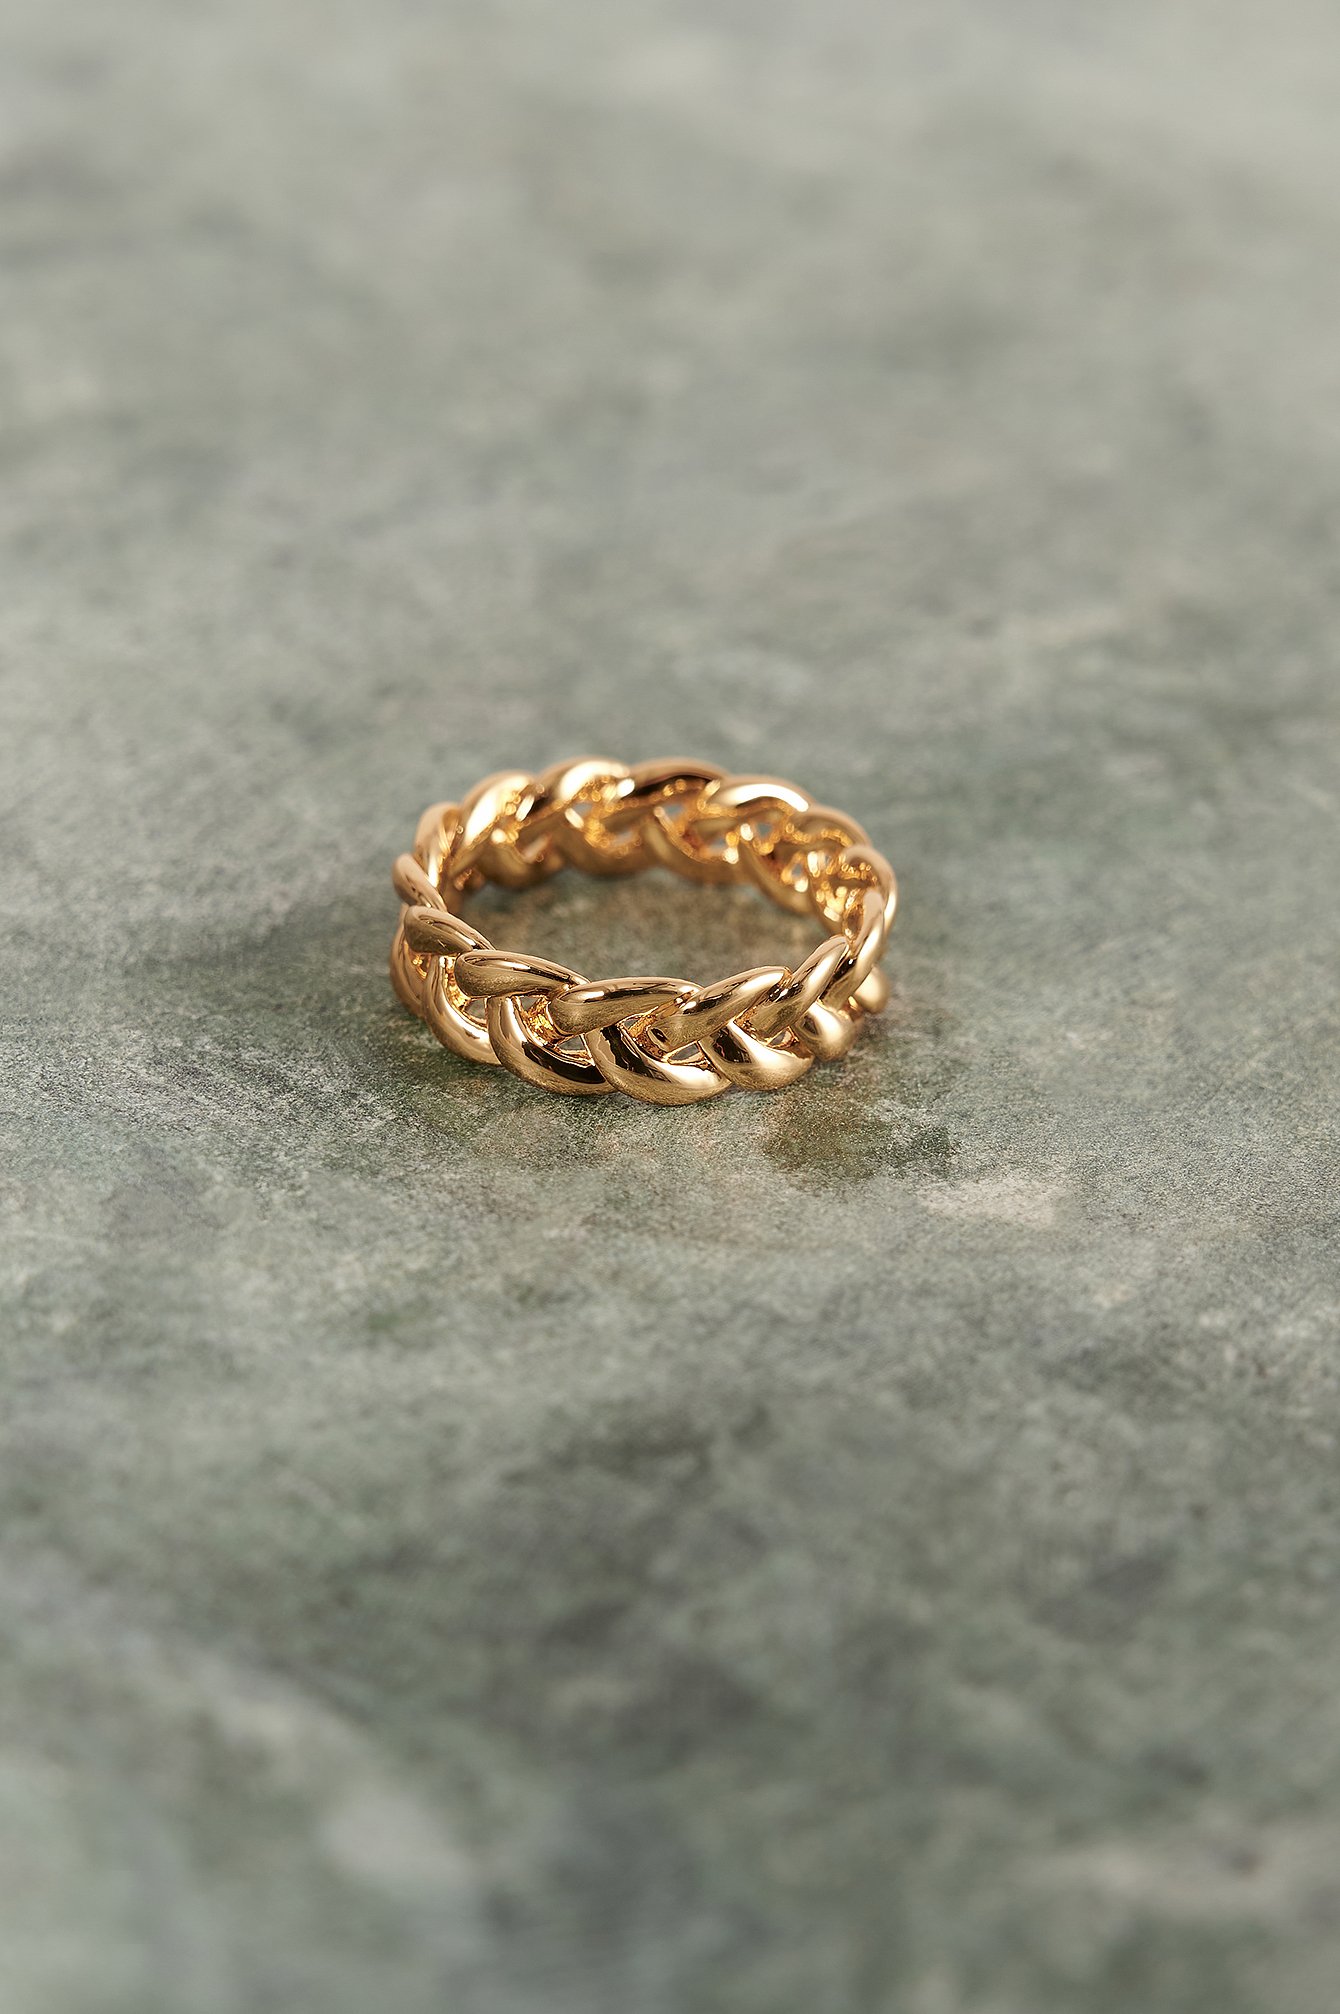 Gold 18K Gold Plated Braided Ring